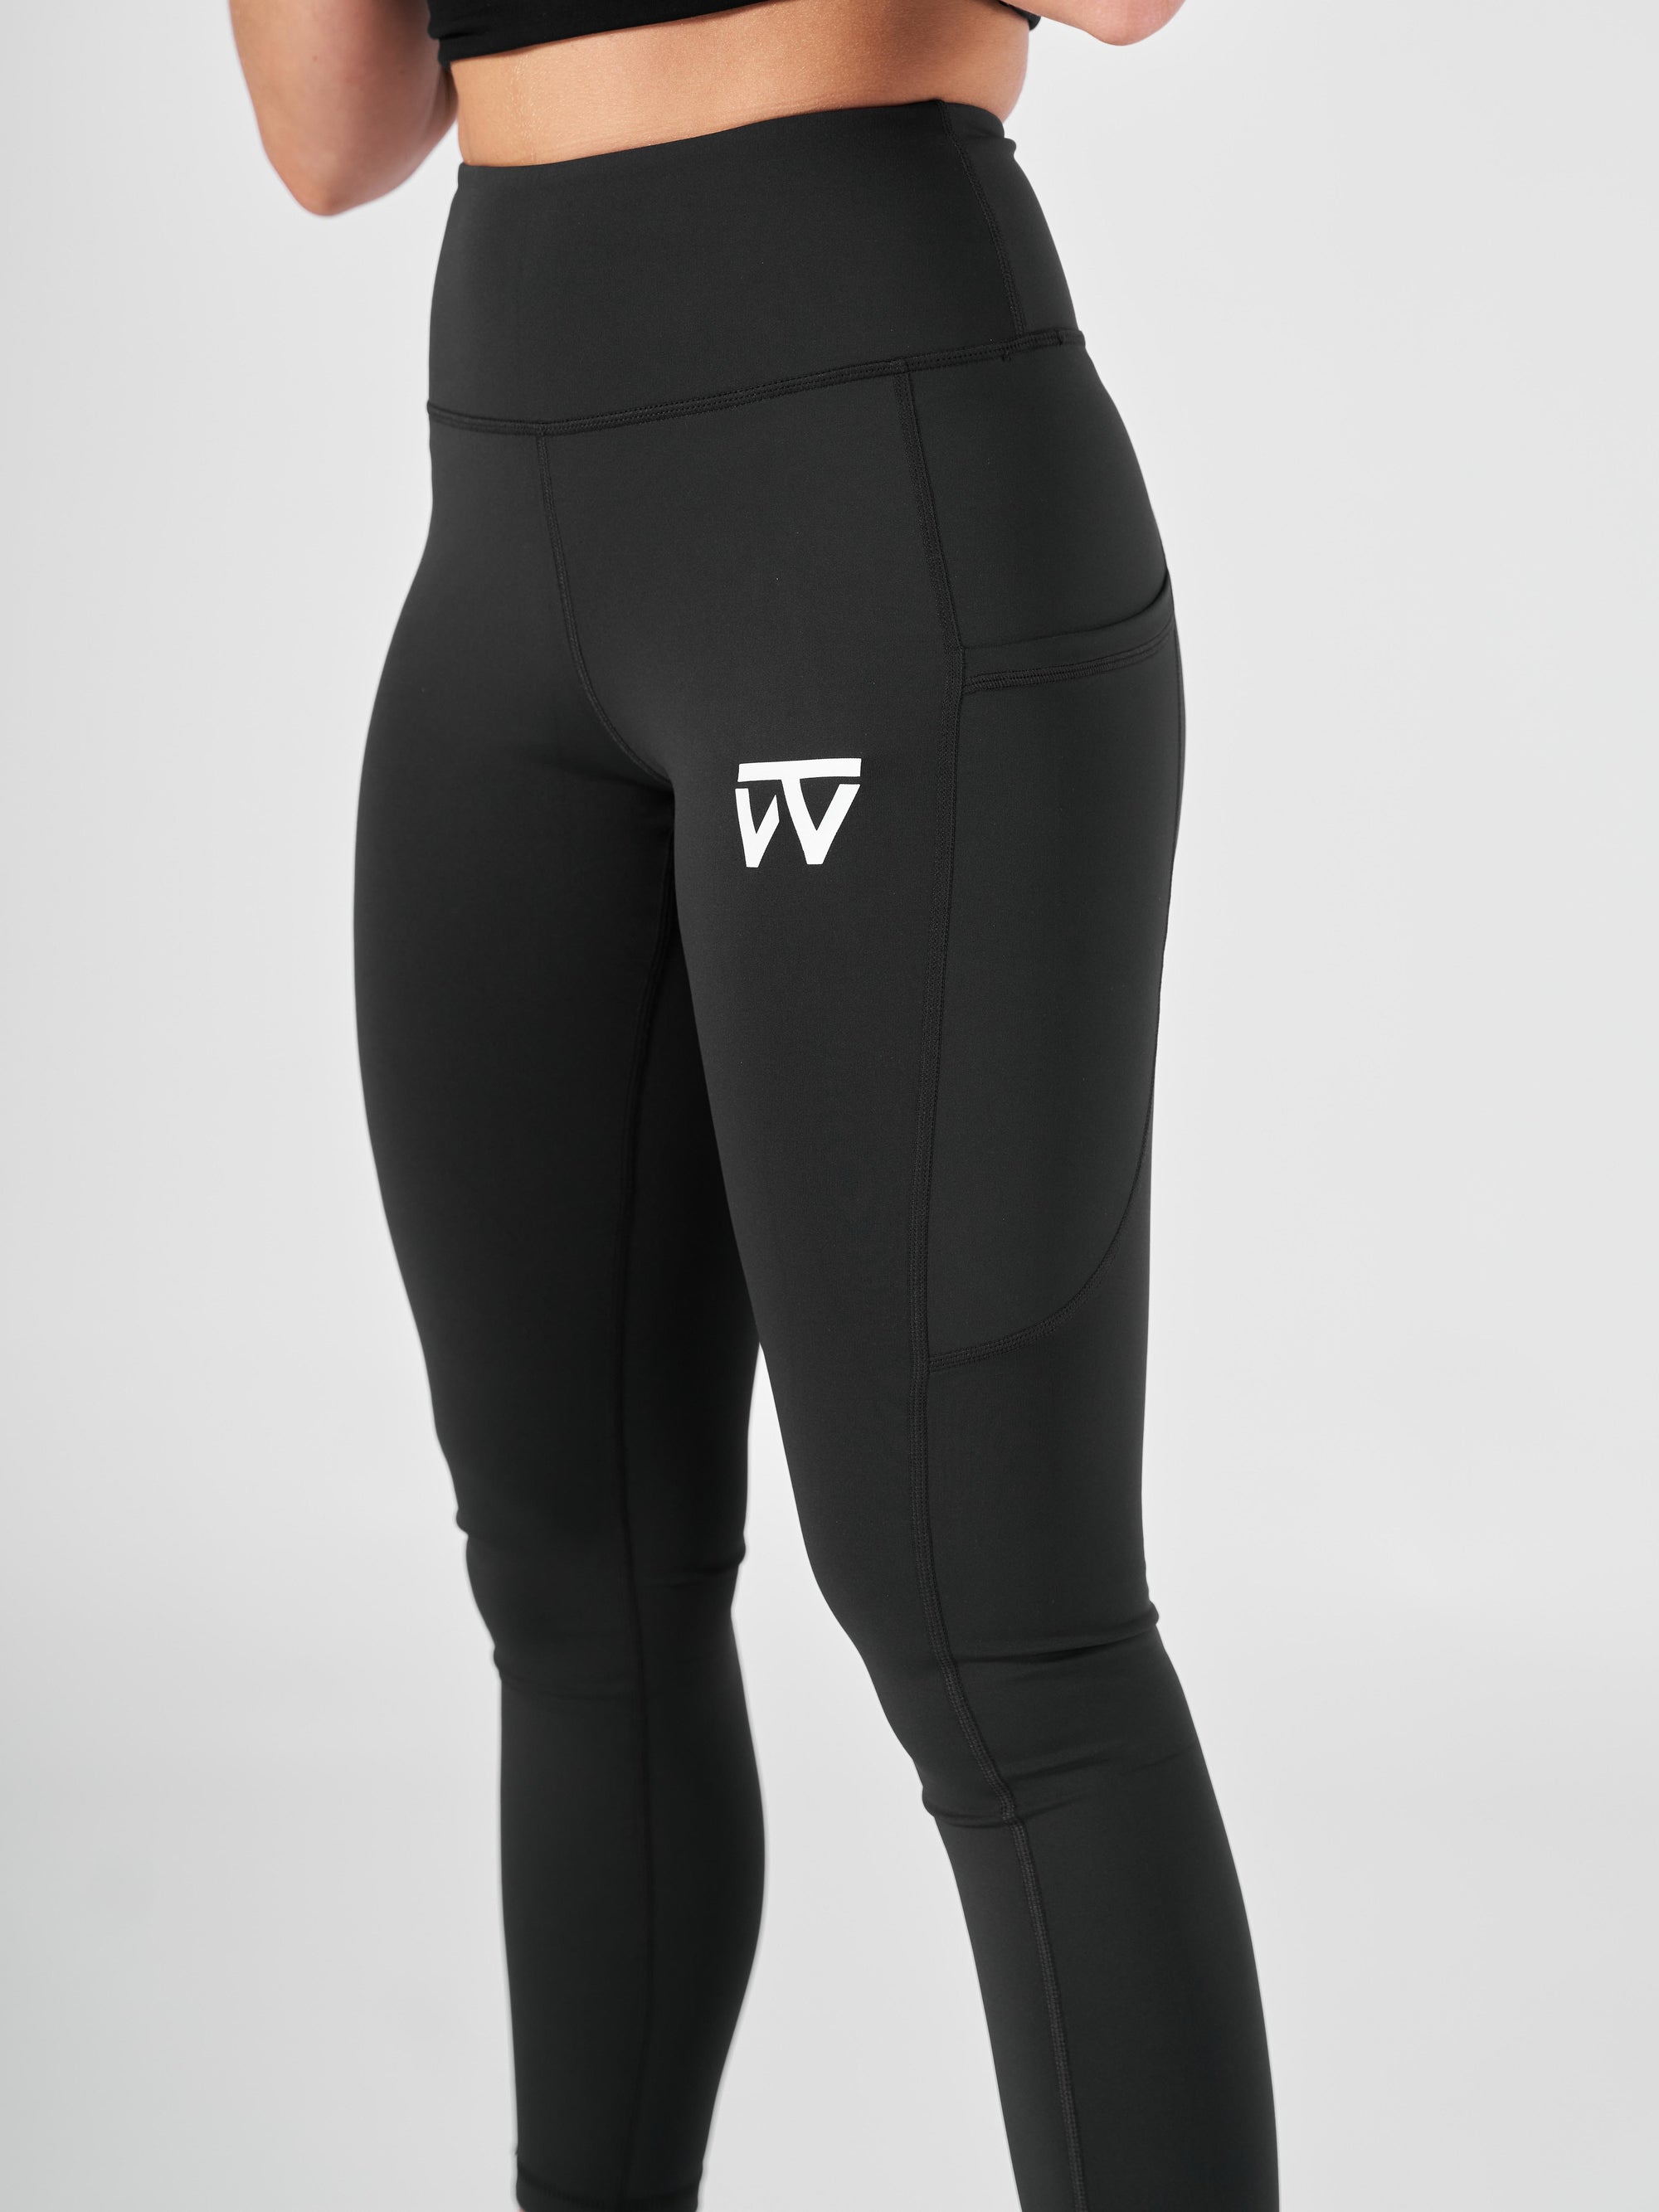 Womens Pure Legging Black, Fitness + Sports + Workout